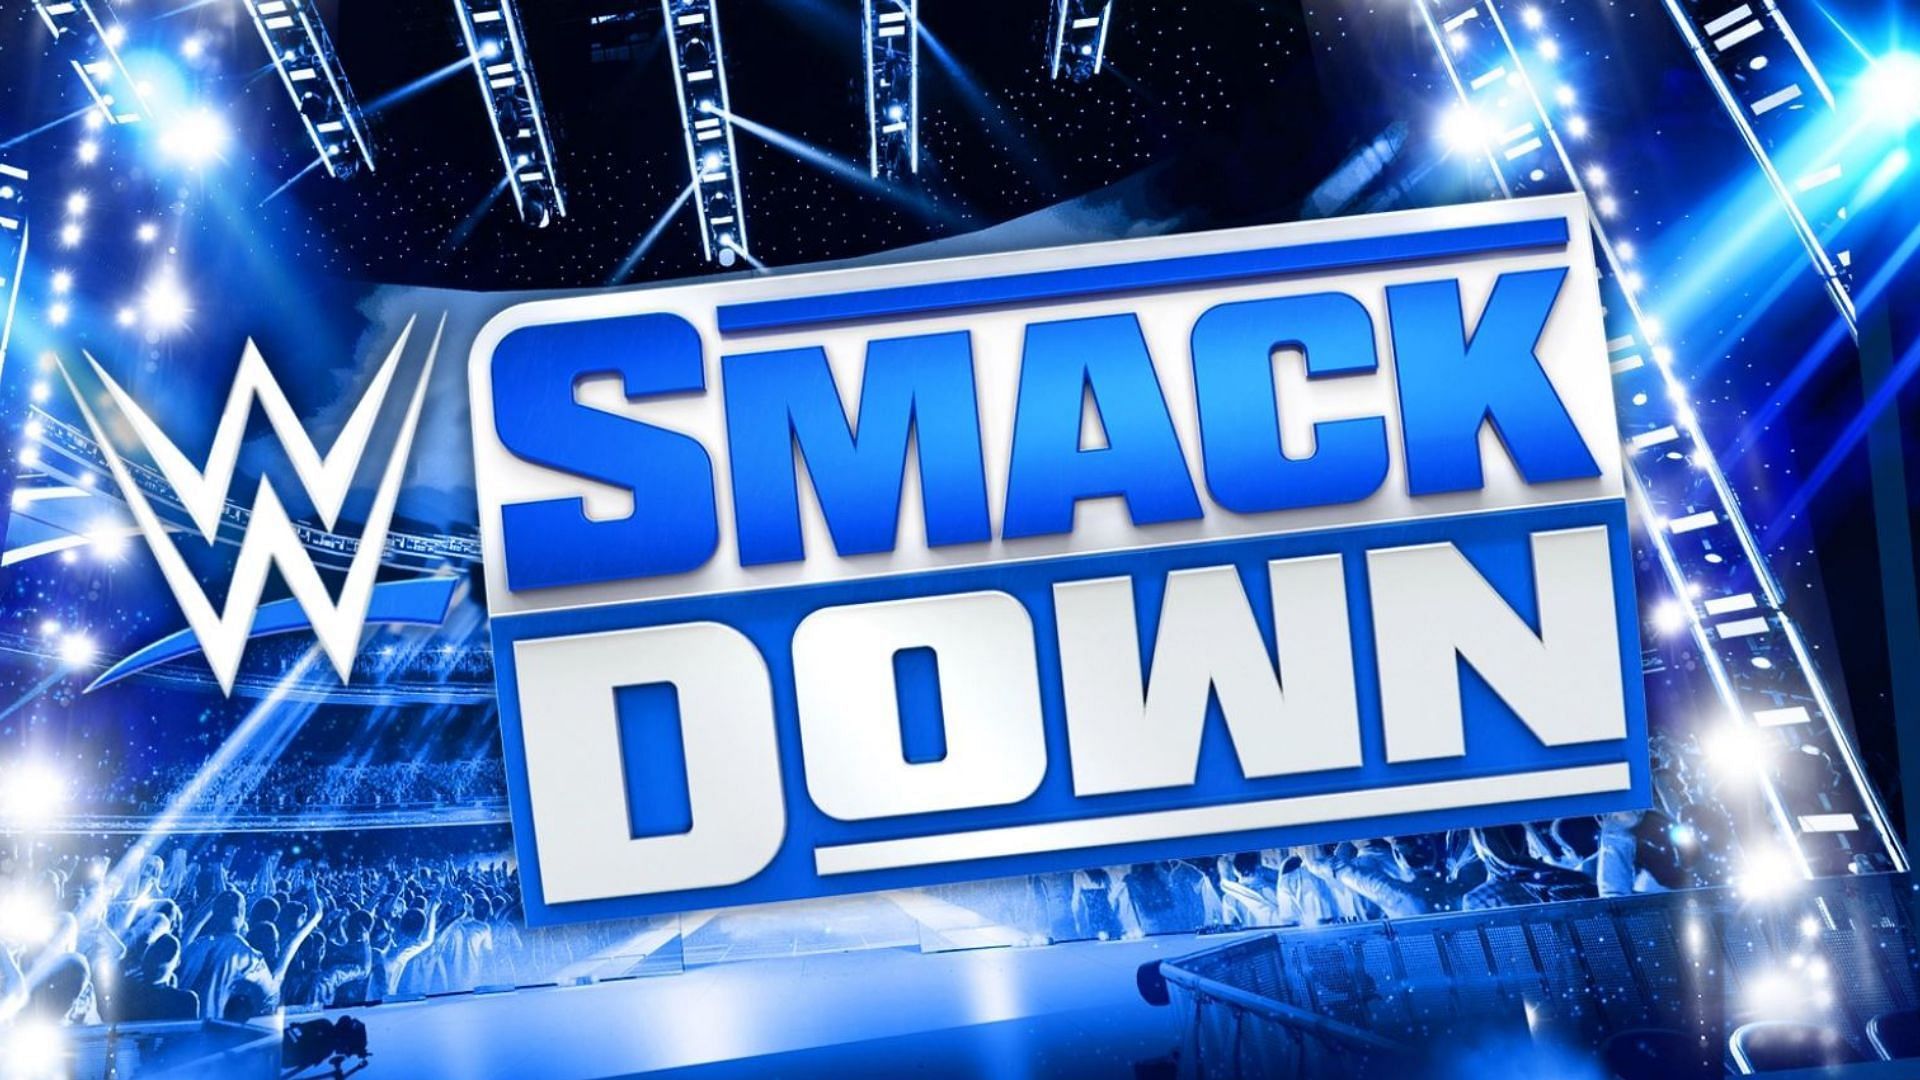 A title tournament will begin tonight on SmackDown.